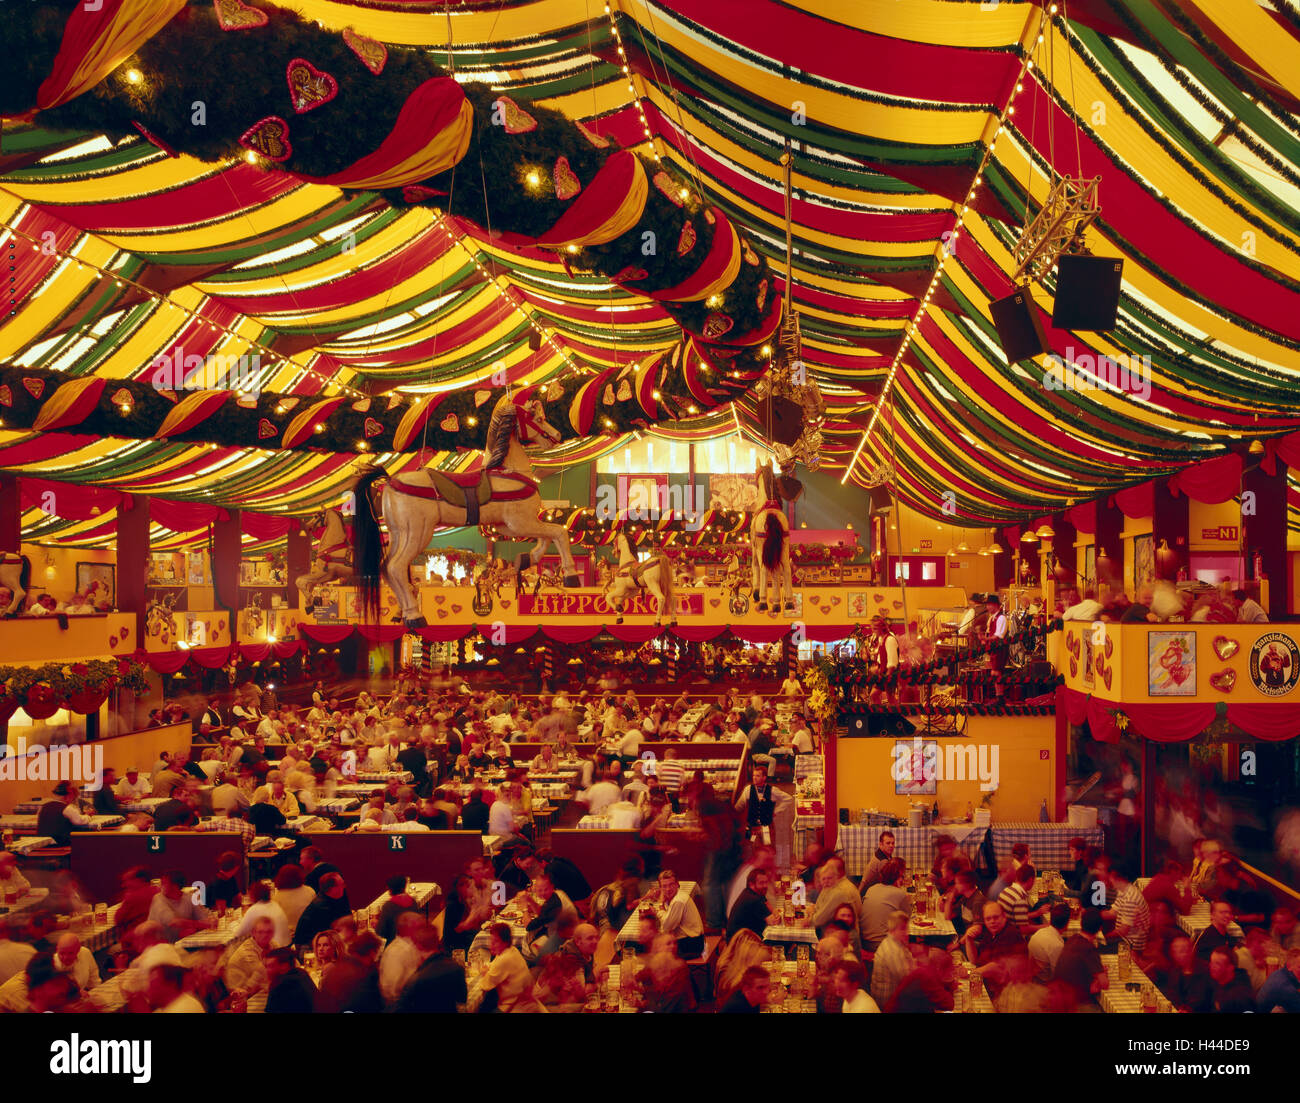 Germany, Bavaria, Munich, Oktoberfest, fixed tent, Hippodrom, visitor, inside, overview, Upper Bavaria, Theresienwiese, feast, public festival, person, Wiesn, pleasure feast, fairground, gastronomy, tourism, attraction, world-renowned, famous, amusements, Stock Photo